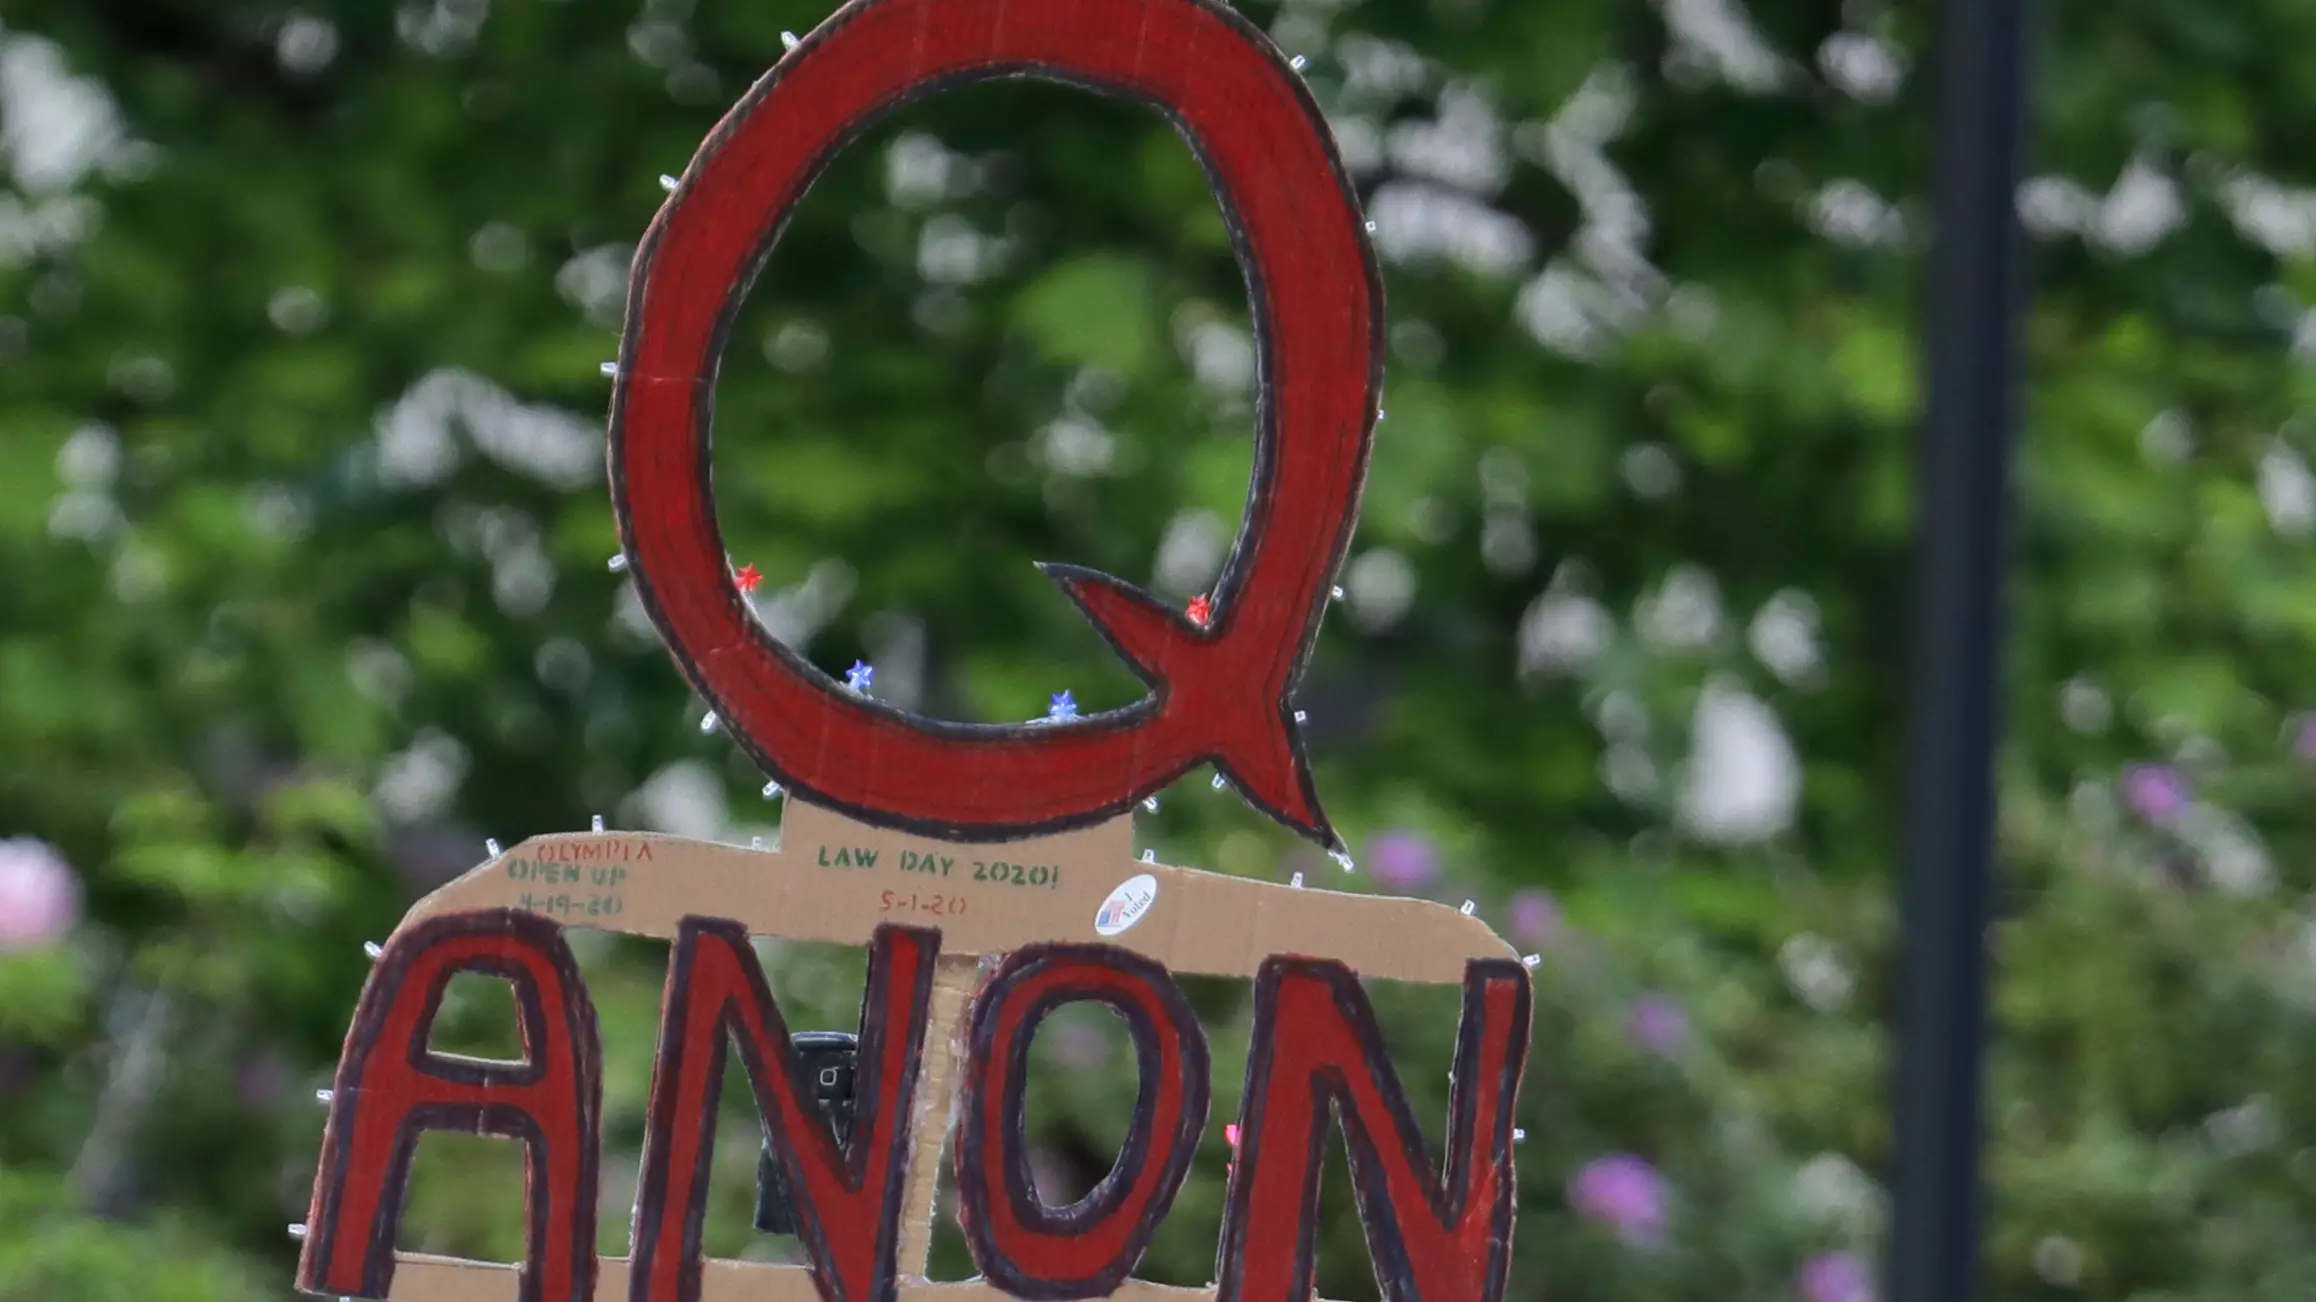 Ex-QAnon Follower Explains What Made Them Stop Believing In Conspiracy Theories